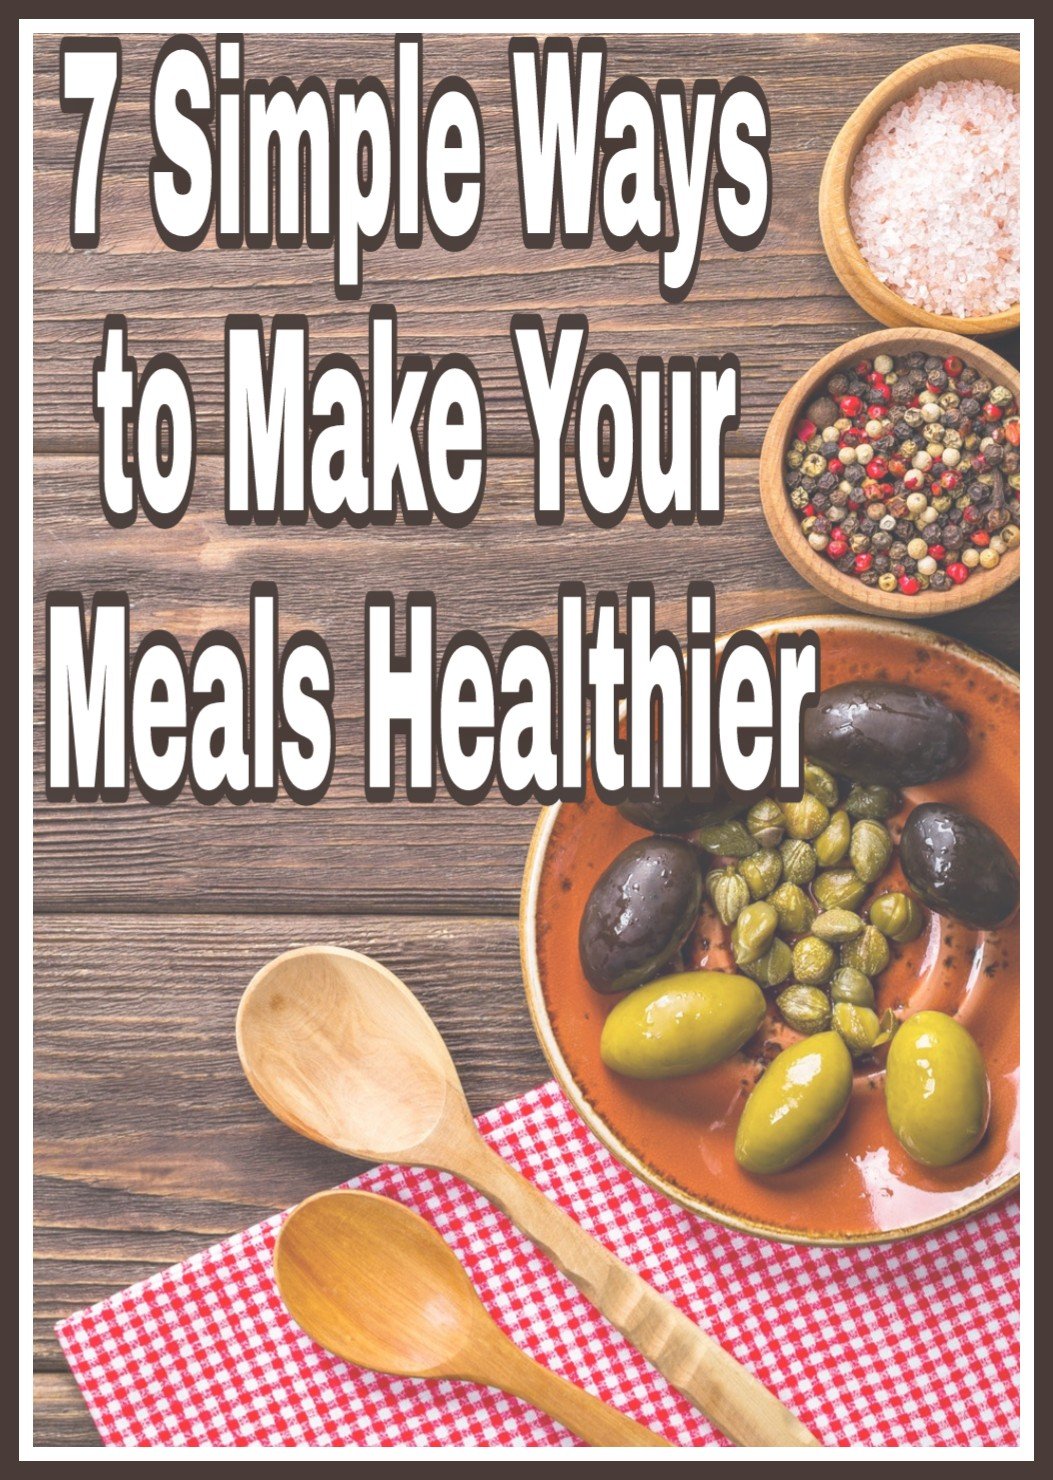 7 Simple Ways to Make Your Meals Healthier title on background image of table with healthy food in wooden bowls